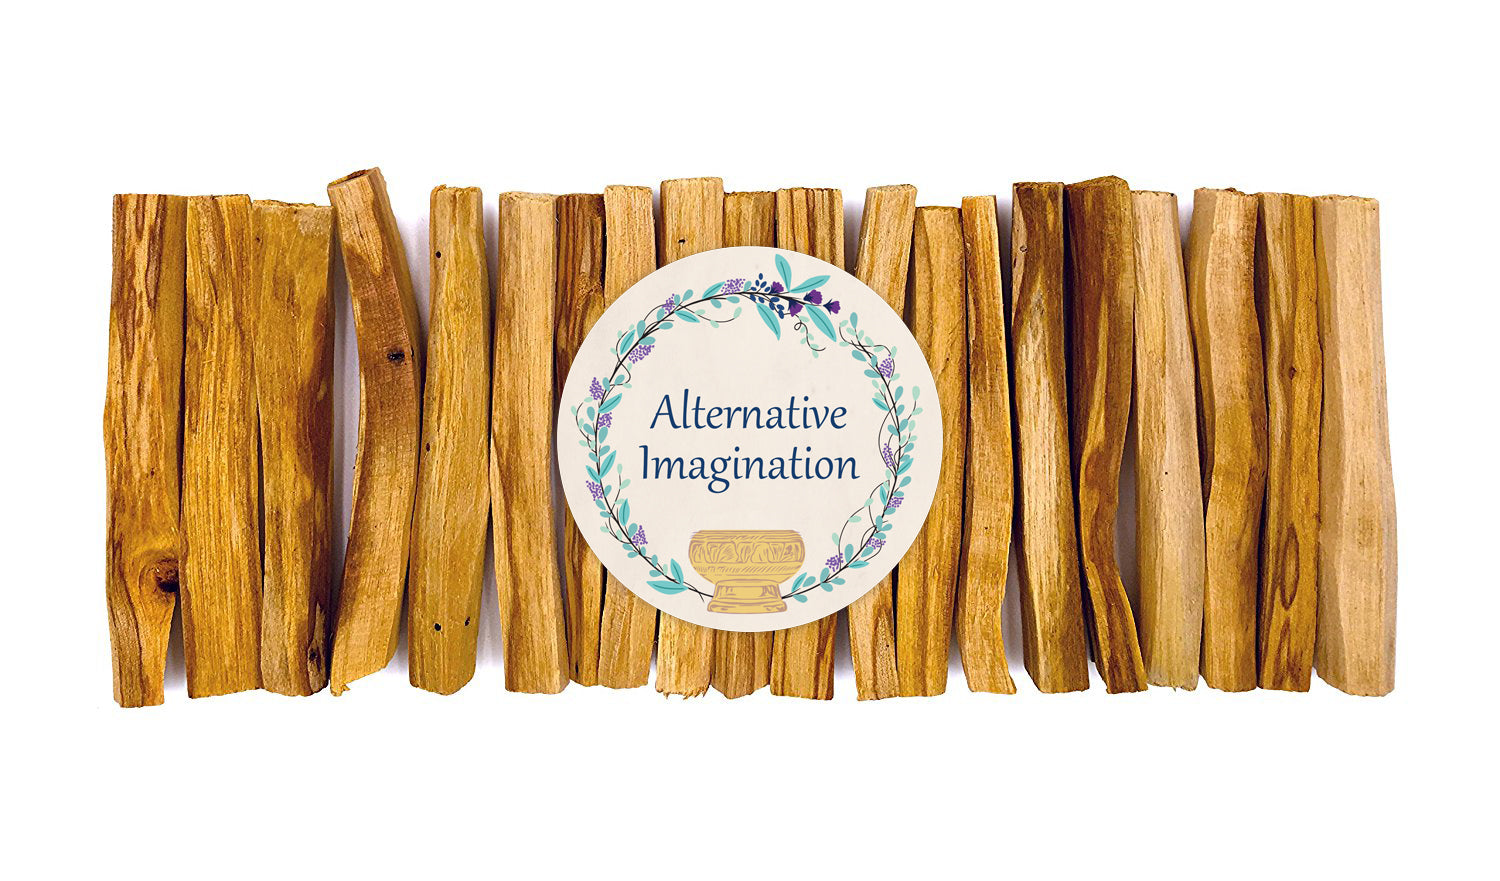 Palo Santo, Holy Wood Incense Sticks (Pack of 6, 12, or 20)